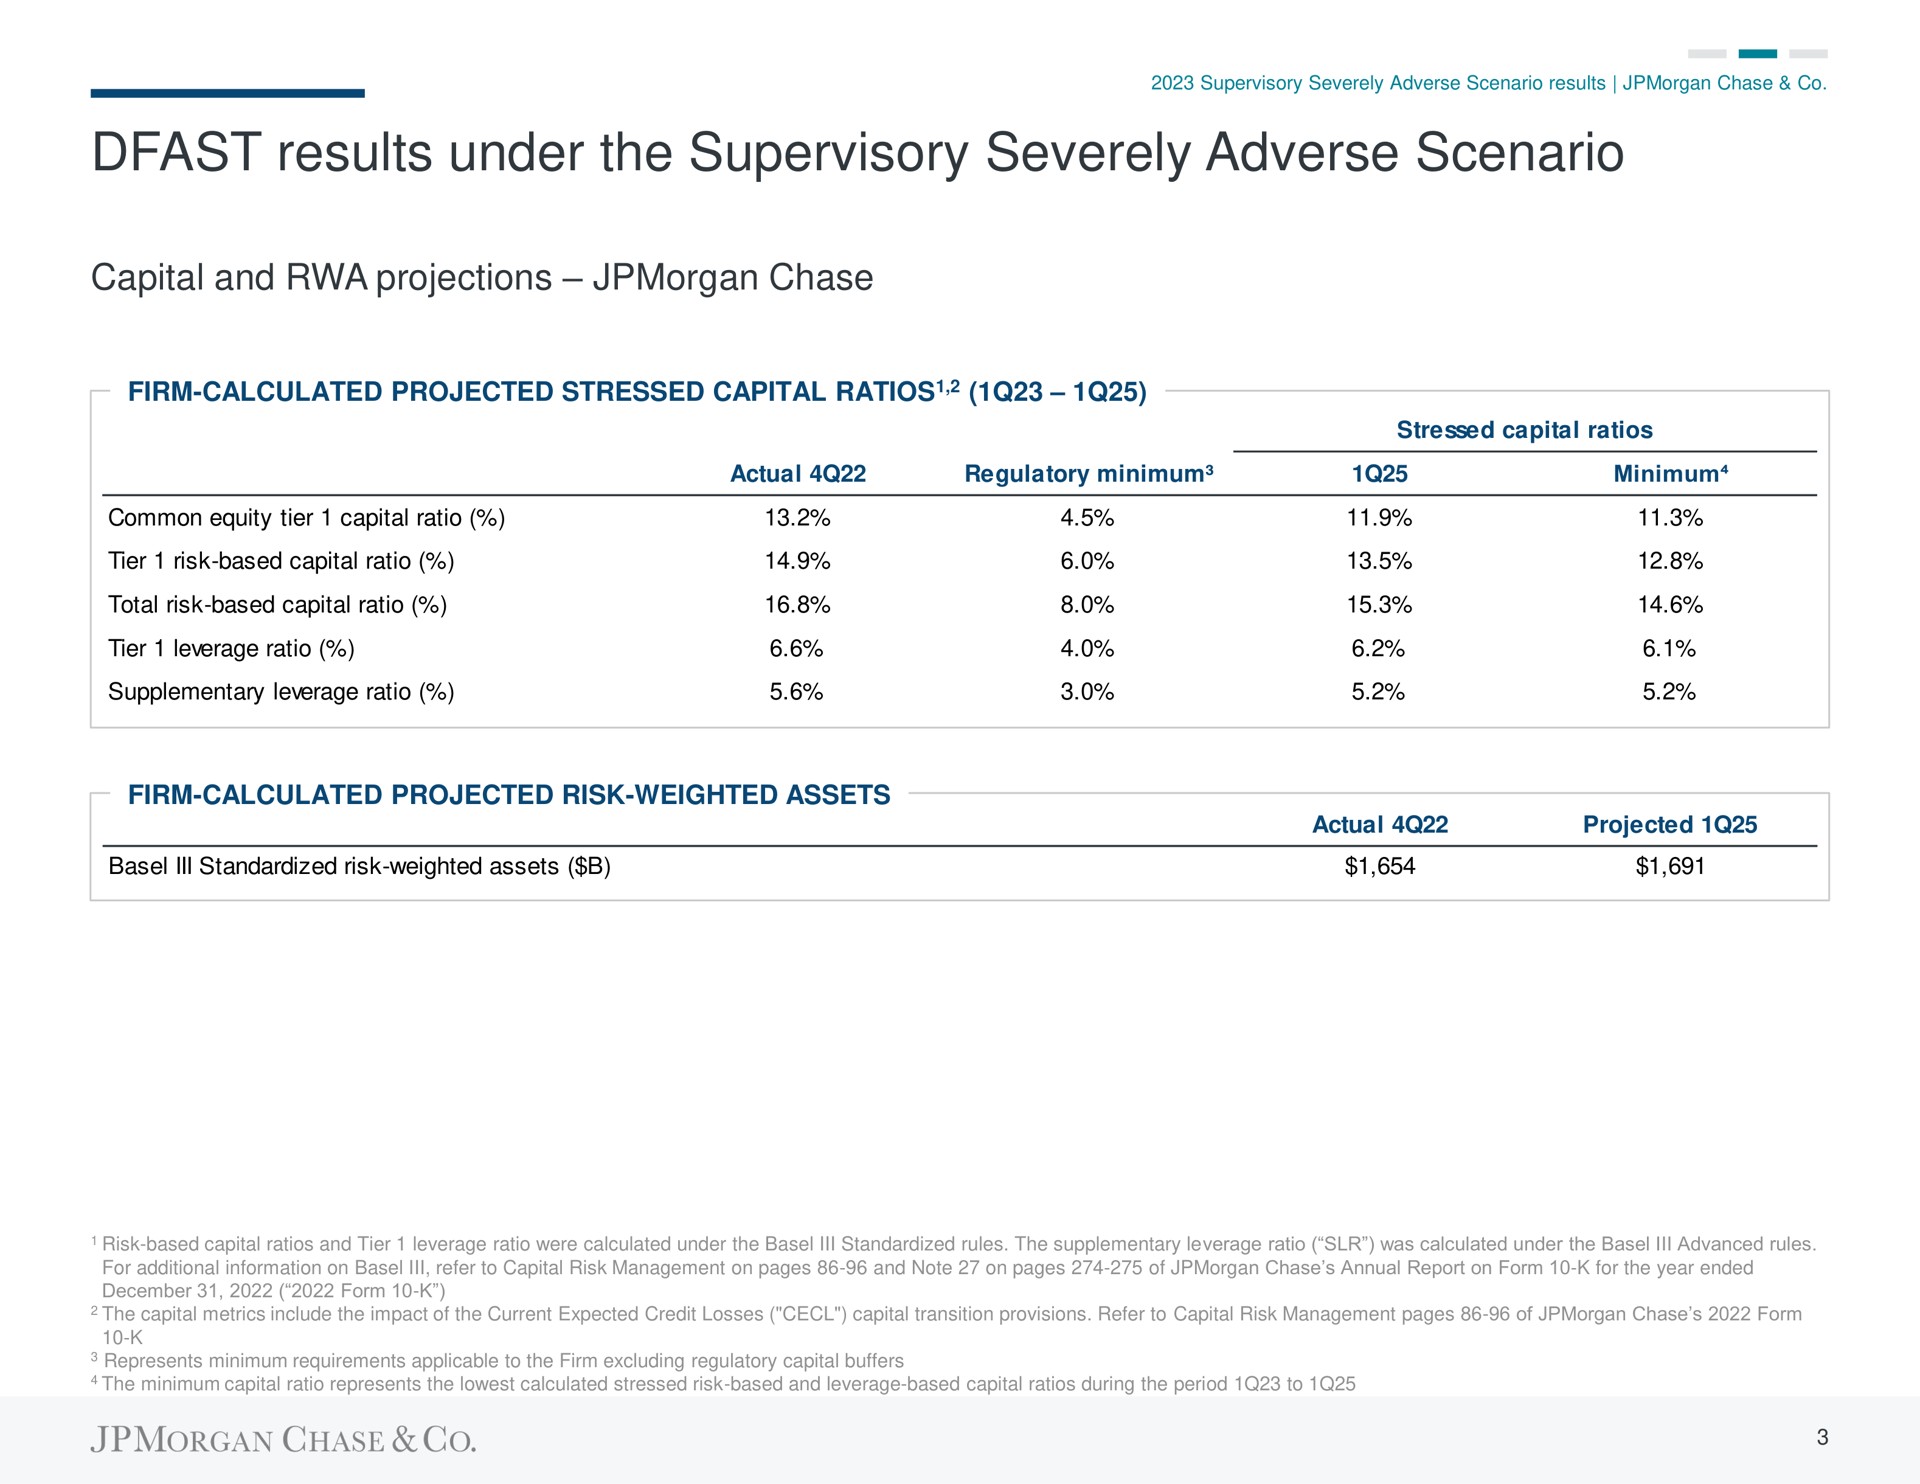 results under the supervisory severely adverse scenario capital and projections chase | J.P.Morgan